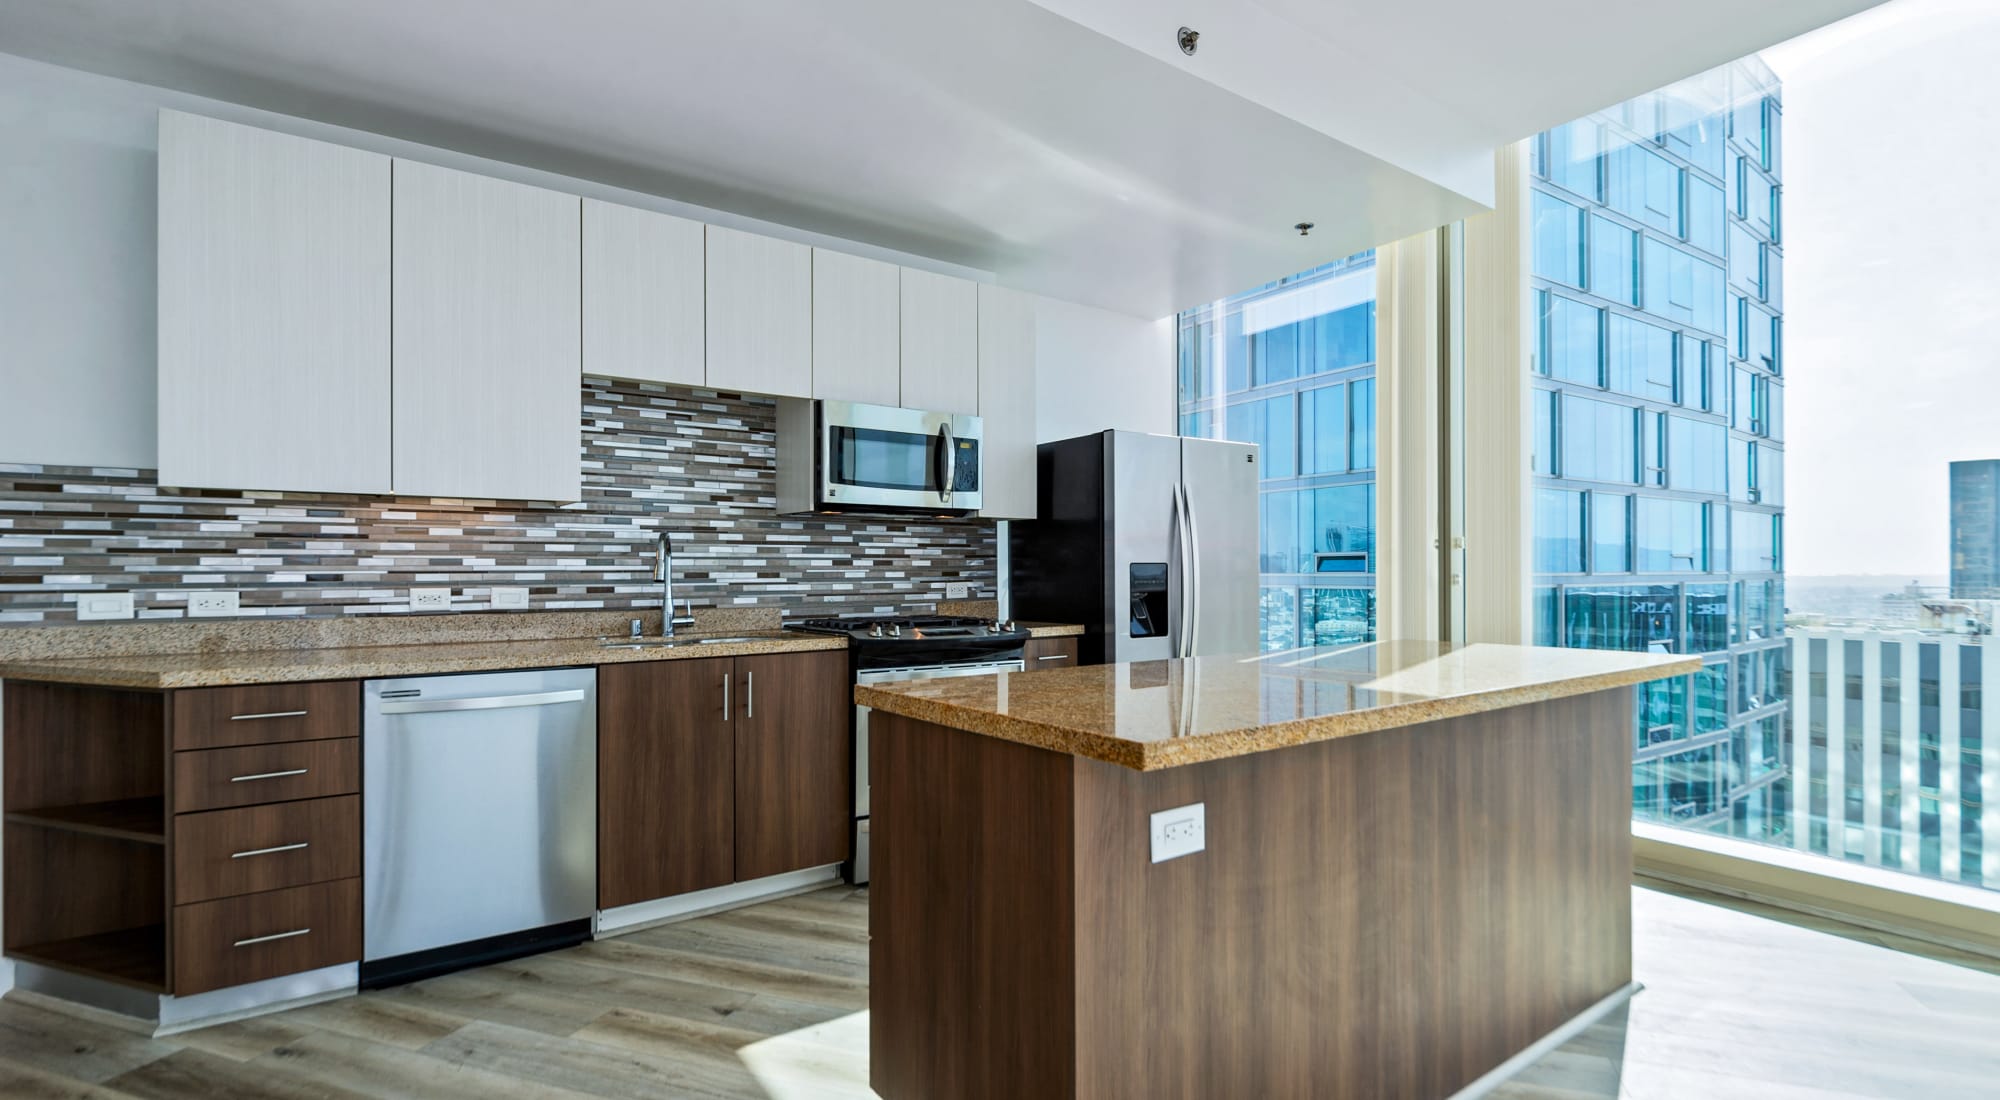 Well-lit modern kitchen at Apartments in Los Angeles, California